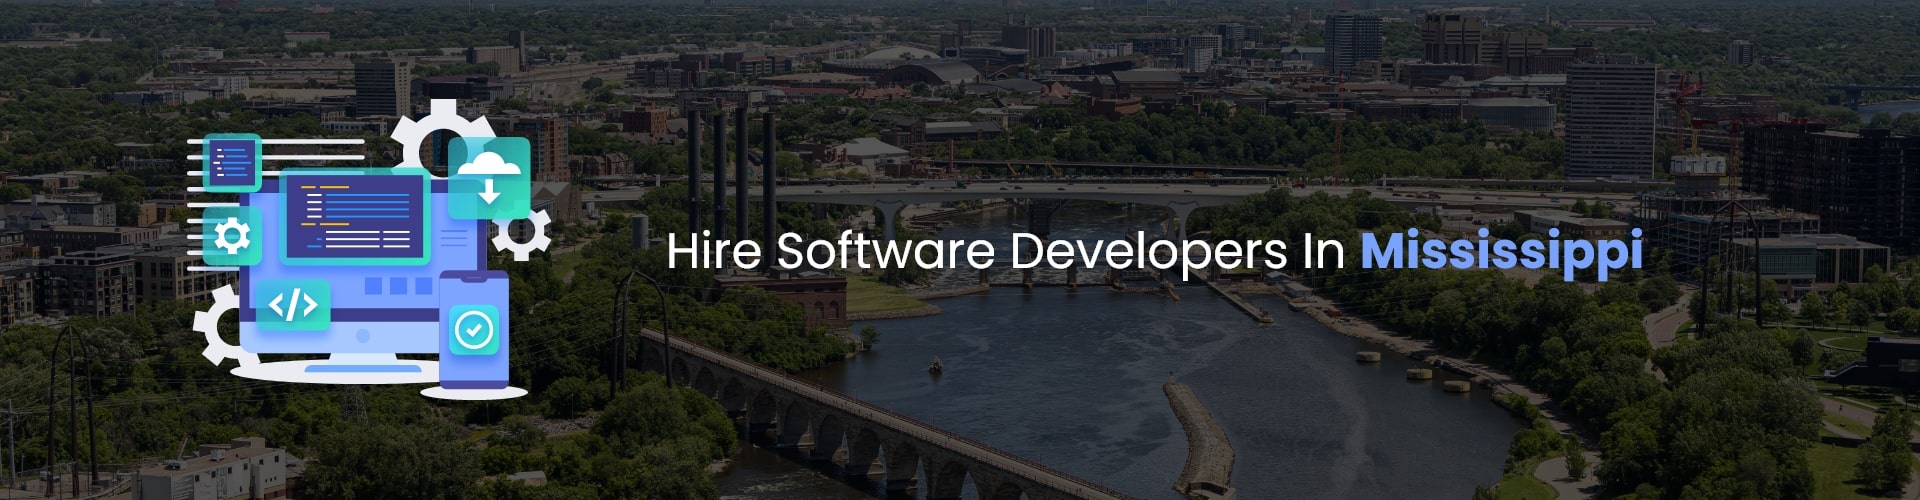 hire software developers in mississippi